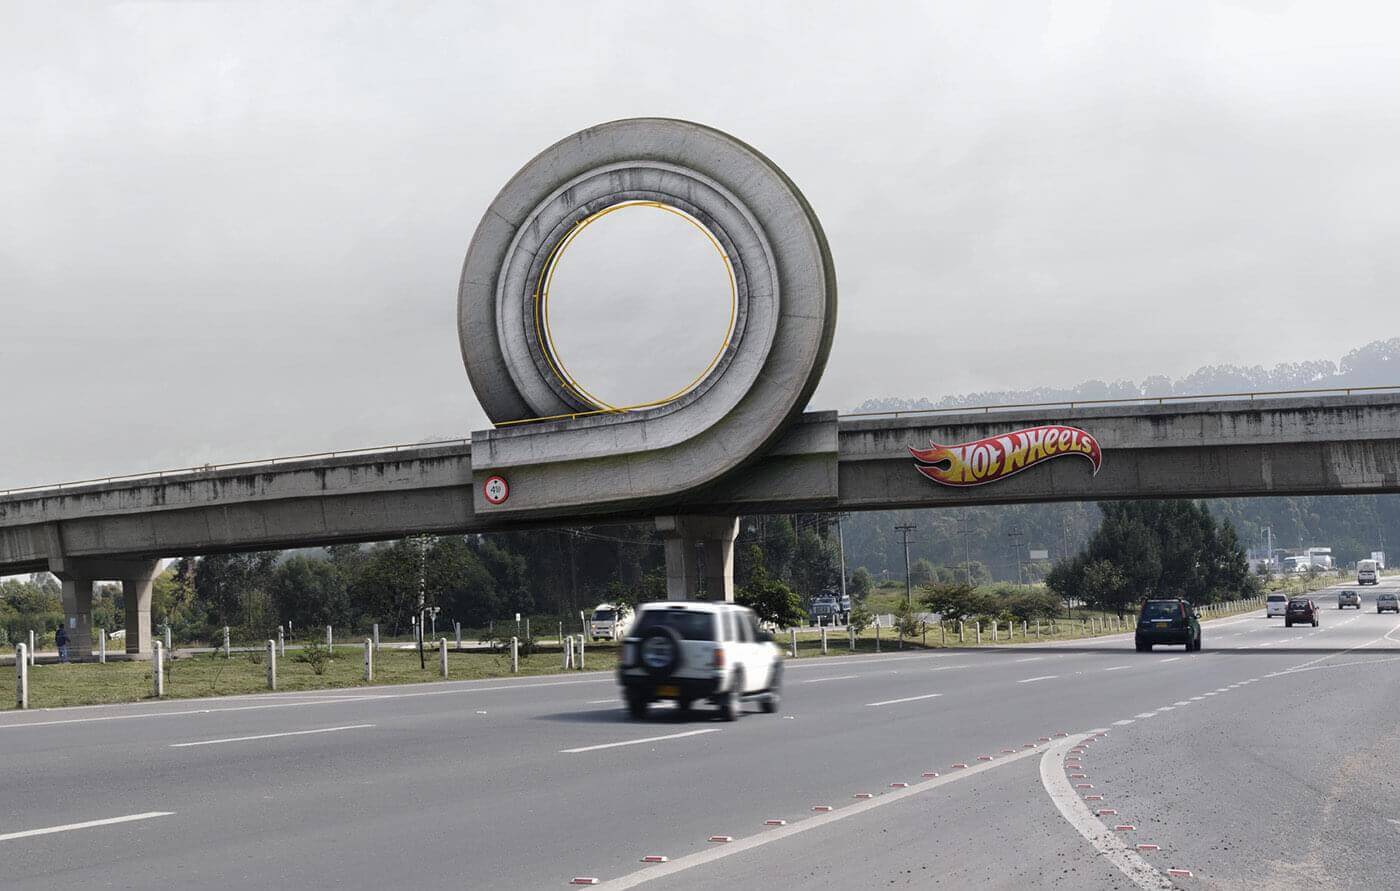 A loop-de-loop addition to an ordinary highway expresses new imaginations for the Hot Wheels brand